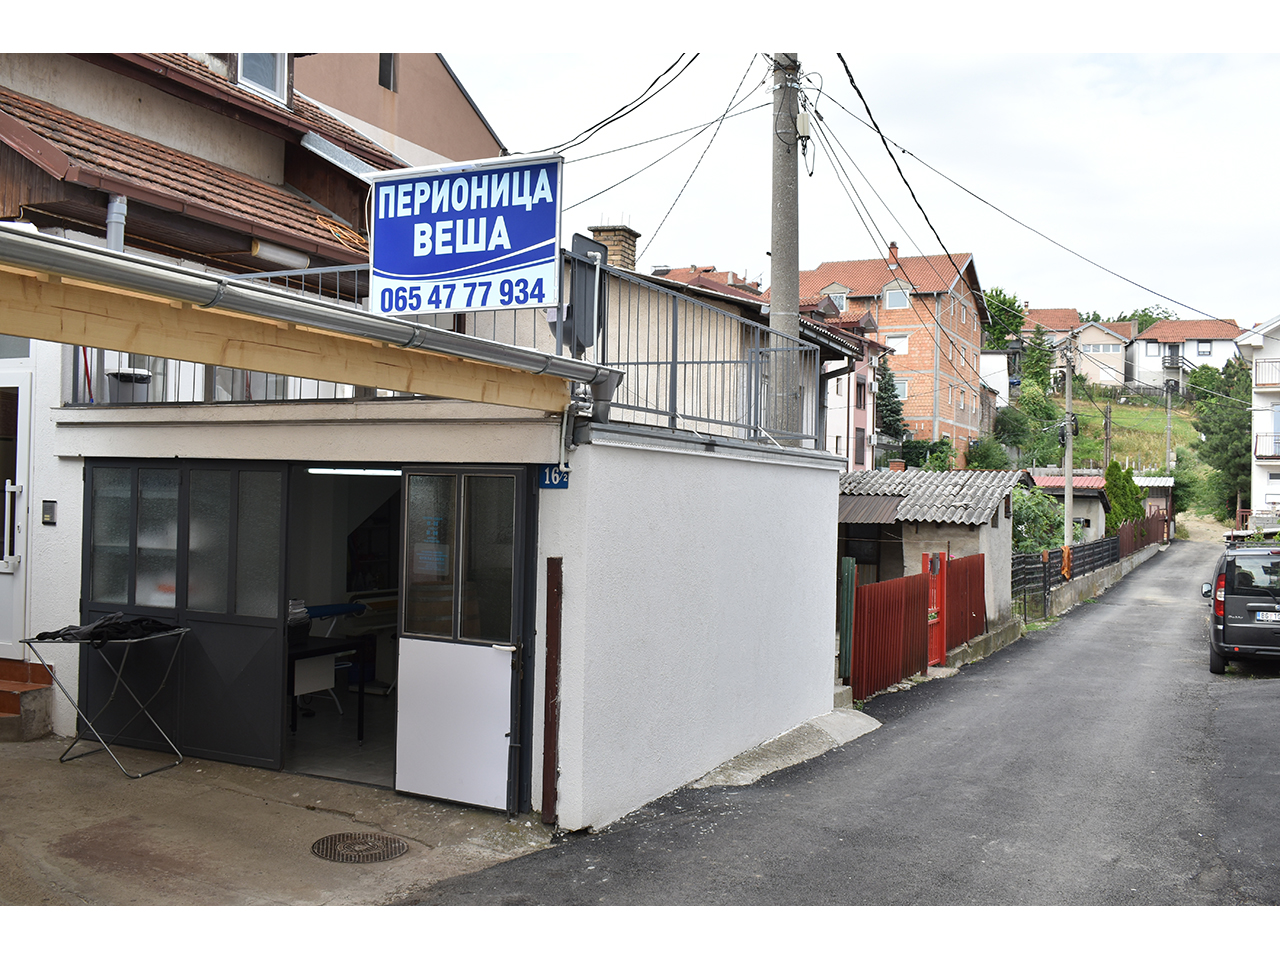 Photo 1 - DRY CLEANING AND LAUNDRY KRISTALINO Dry-cleaning Belgrade